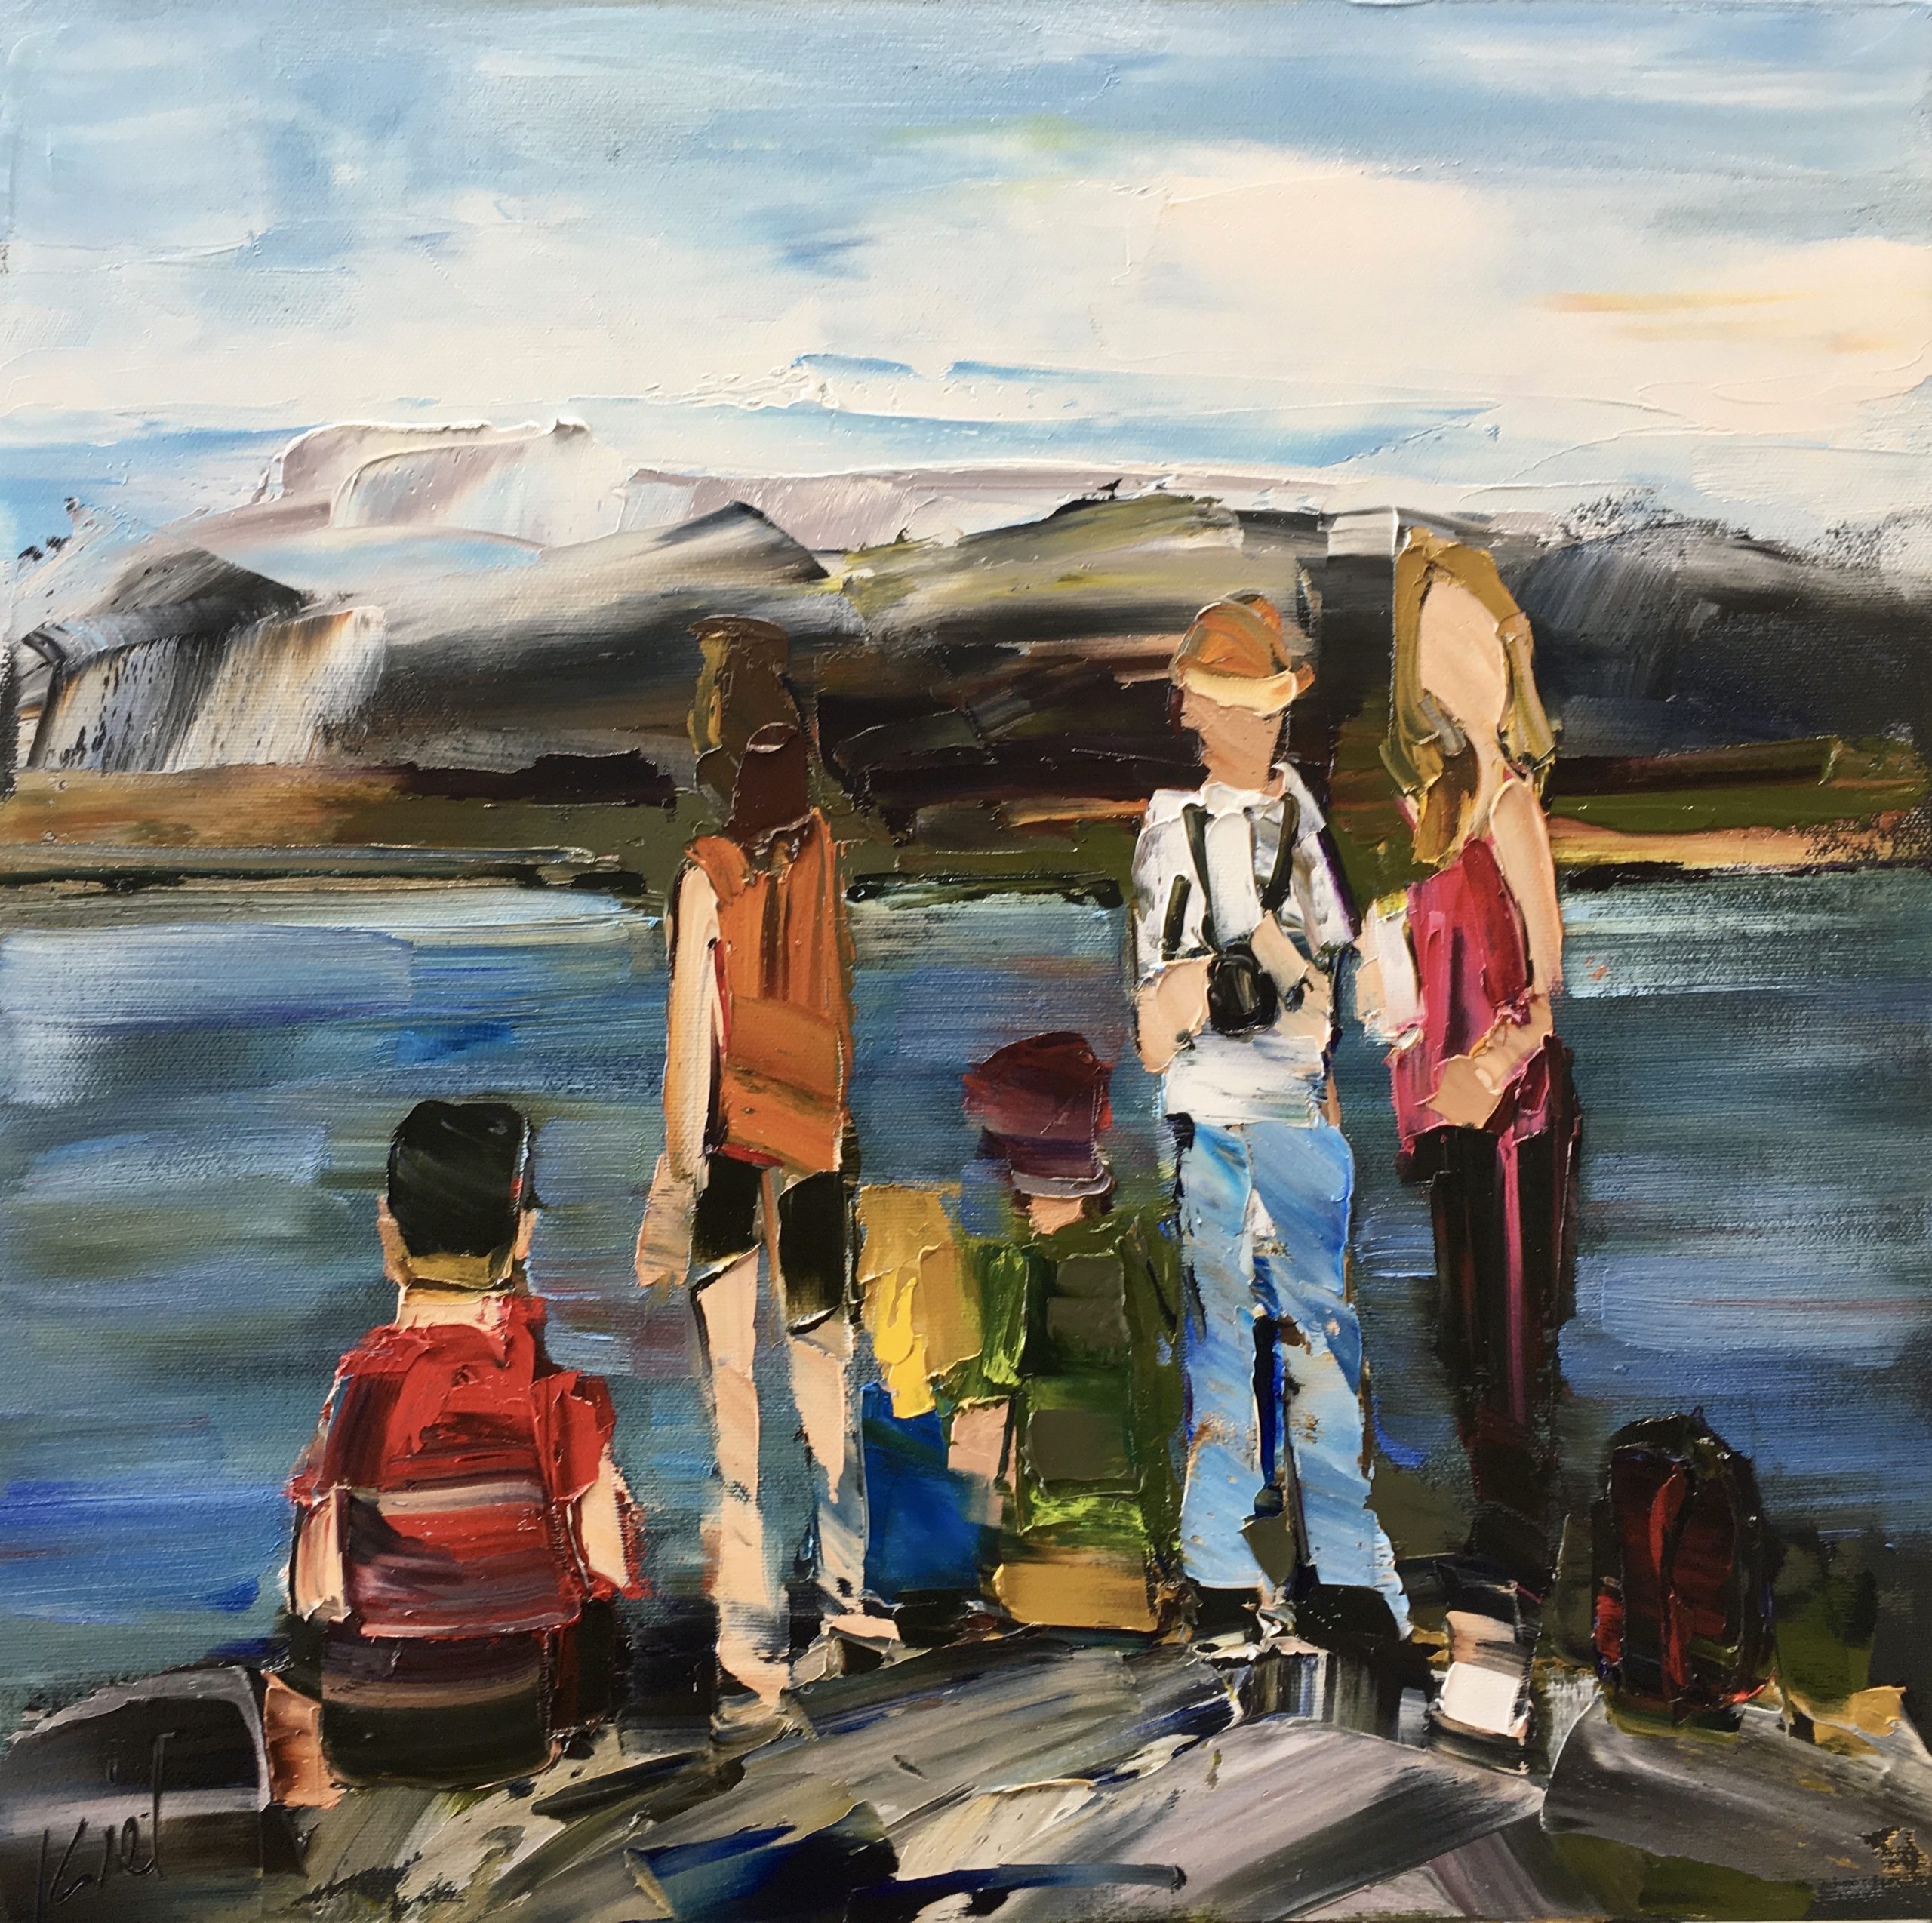 Every Summer Has Its Own Story 2, oil painting by Kimberly Kiel | Effusion Art Gallery + Cast Glass Studio, Invermere BC